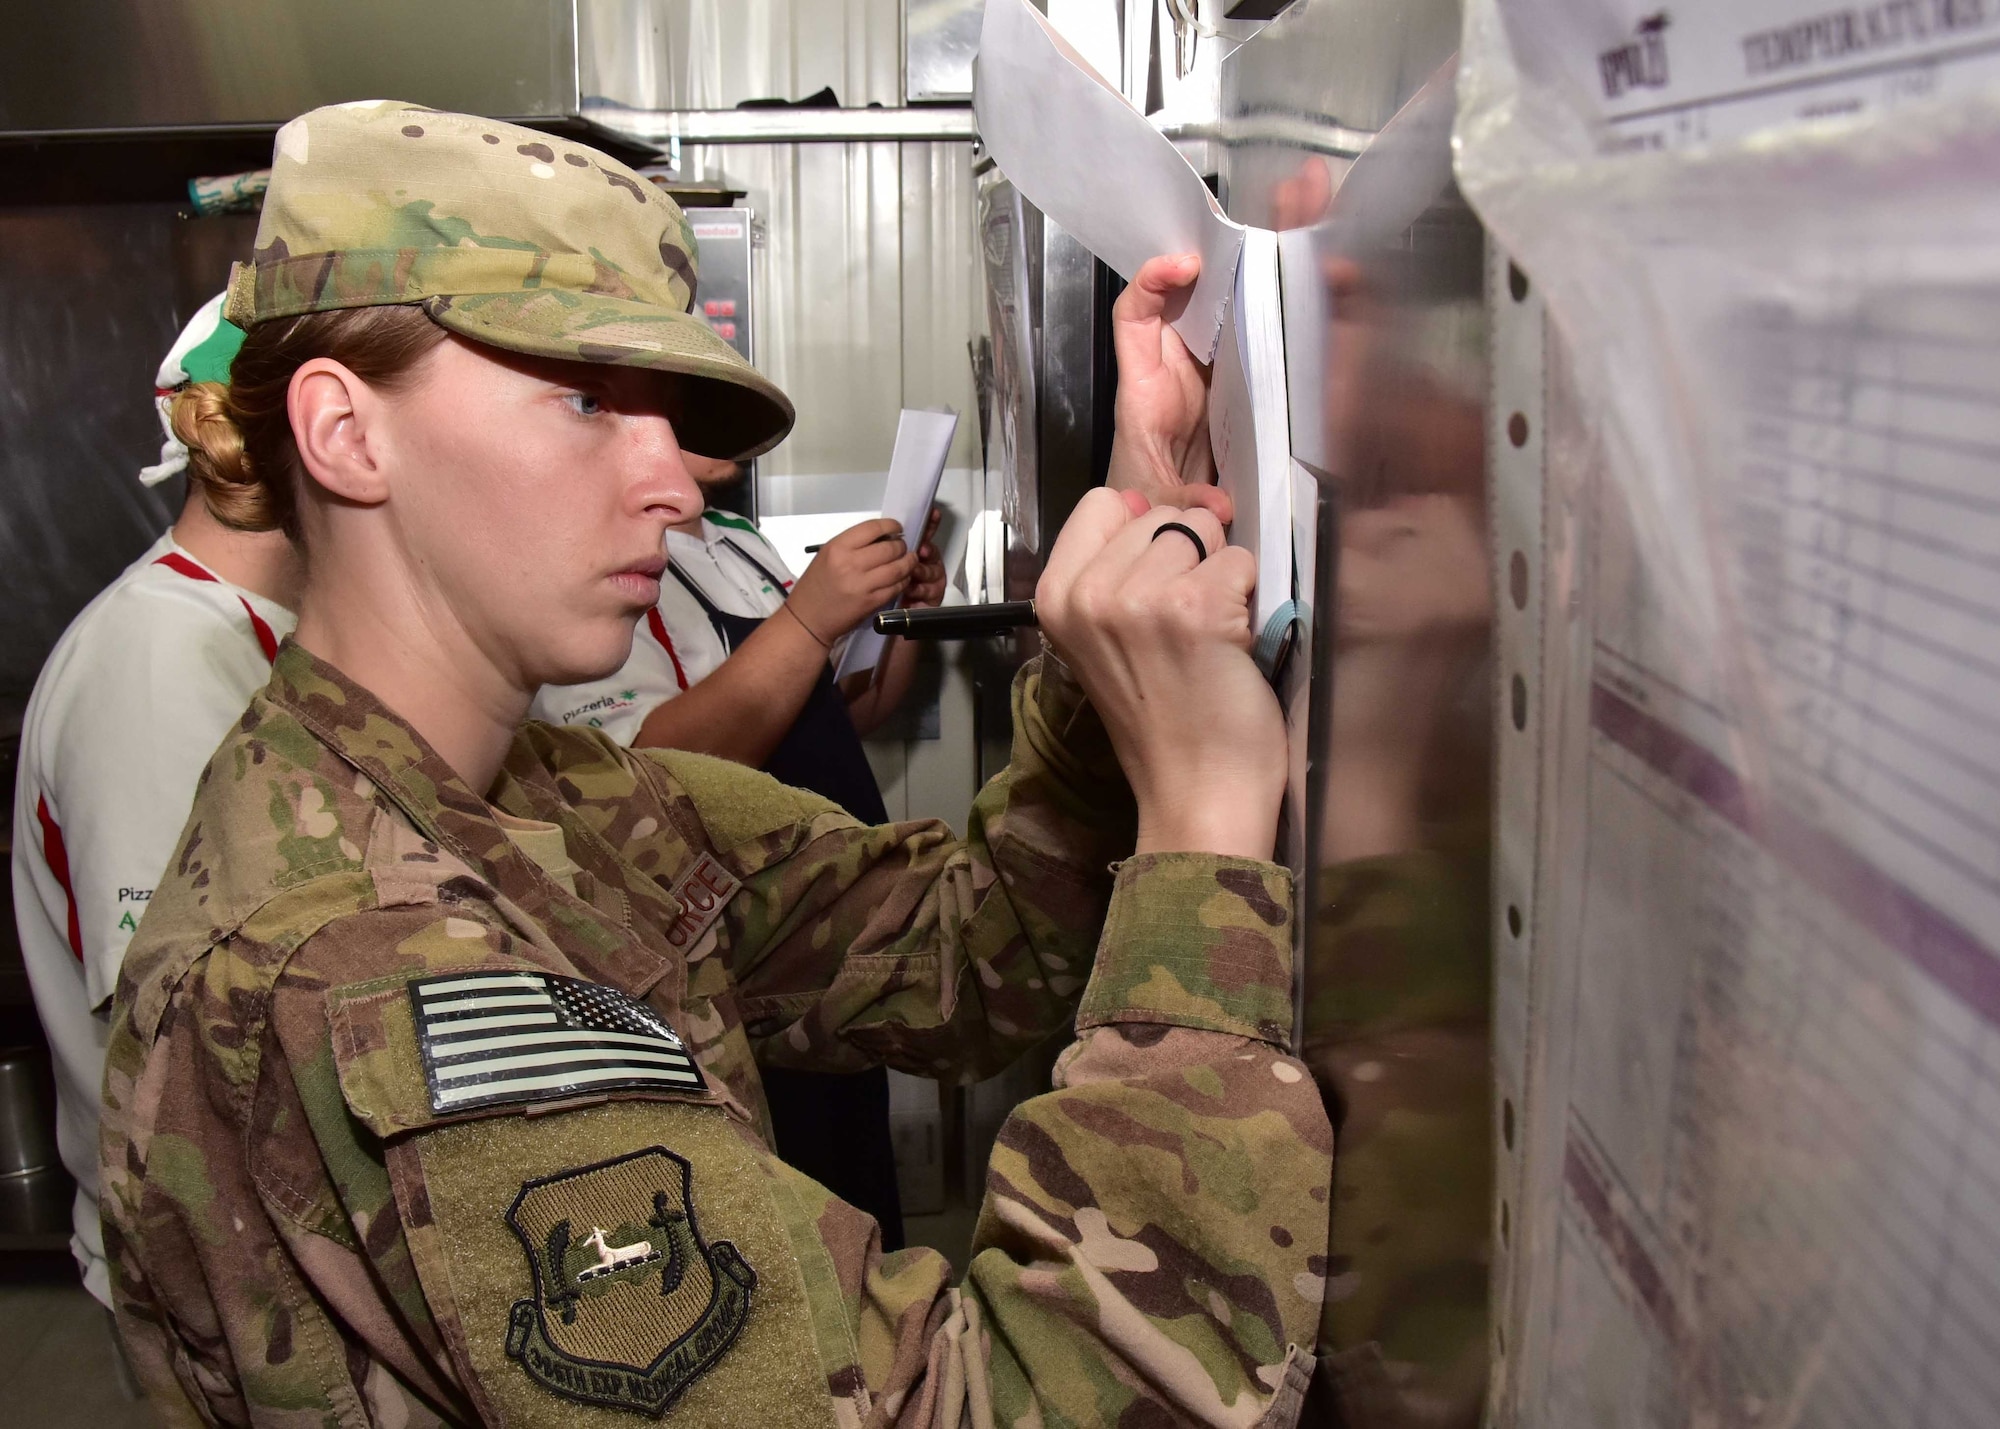 Maj. Jessica McGlade, 386th EMDG public health chief, and her team work diligently to ensure all food and food facilities at their location are safe. They also check to see if food handlers are knowledgeable about the food they are handling. Assessing the risks associated with productions, transportation, storage, preparation, and serving of food is a daily occurrence for them.